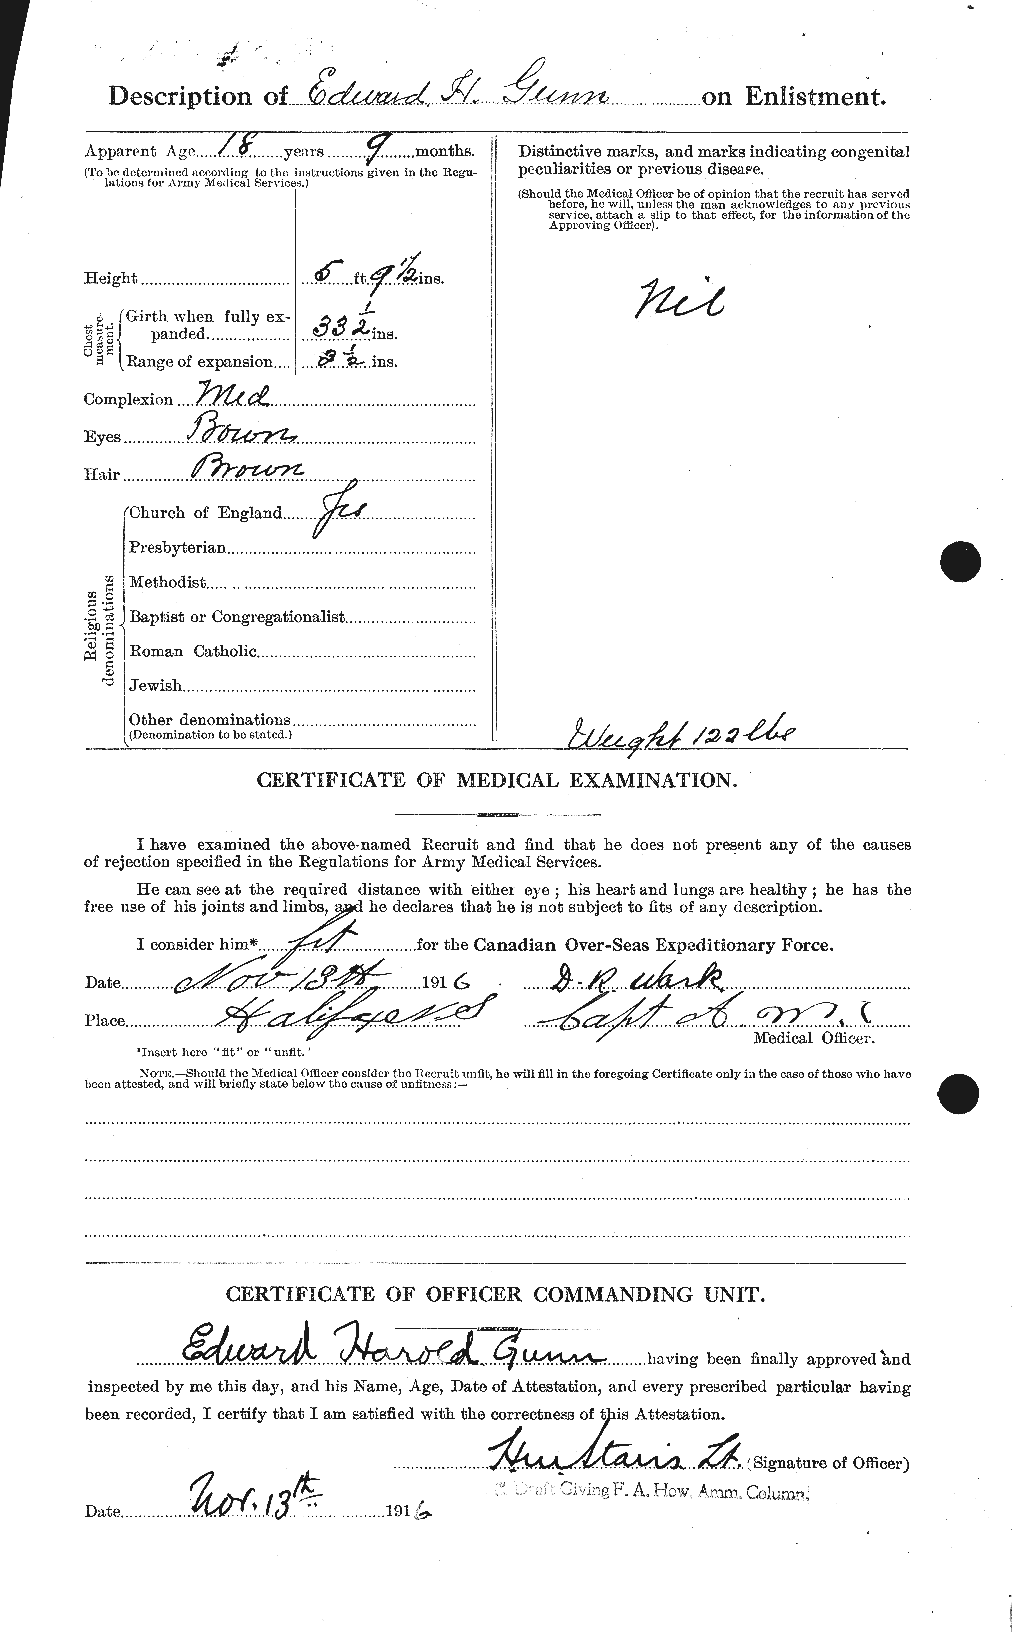 Personnel Records of the First World War - CEF 368035b